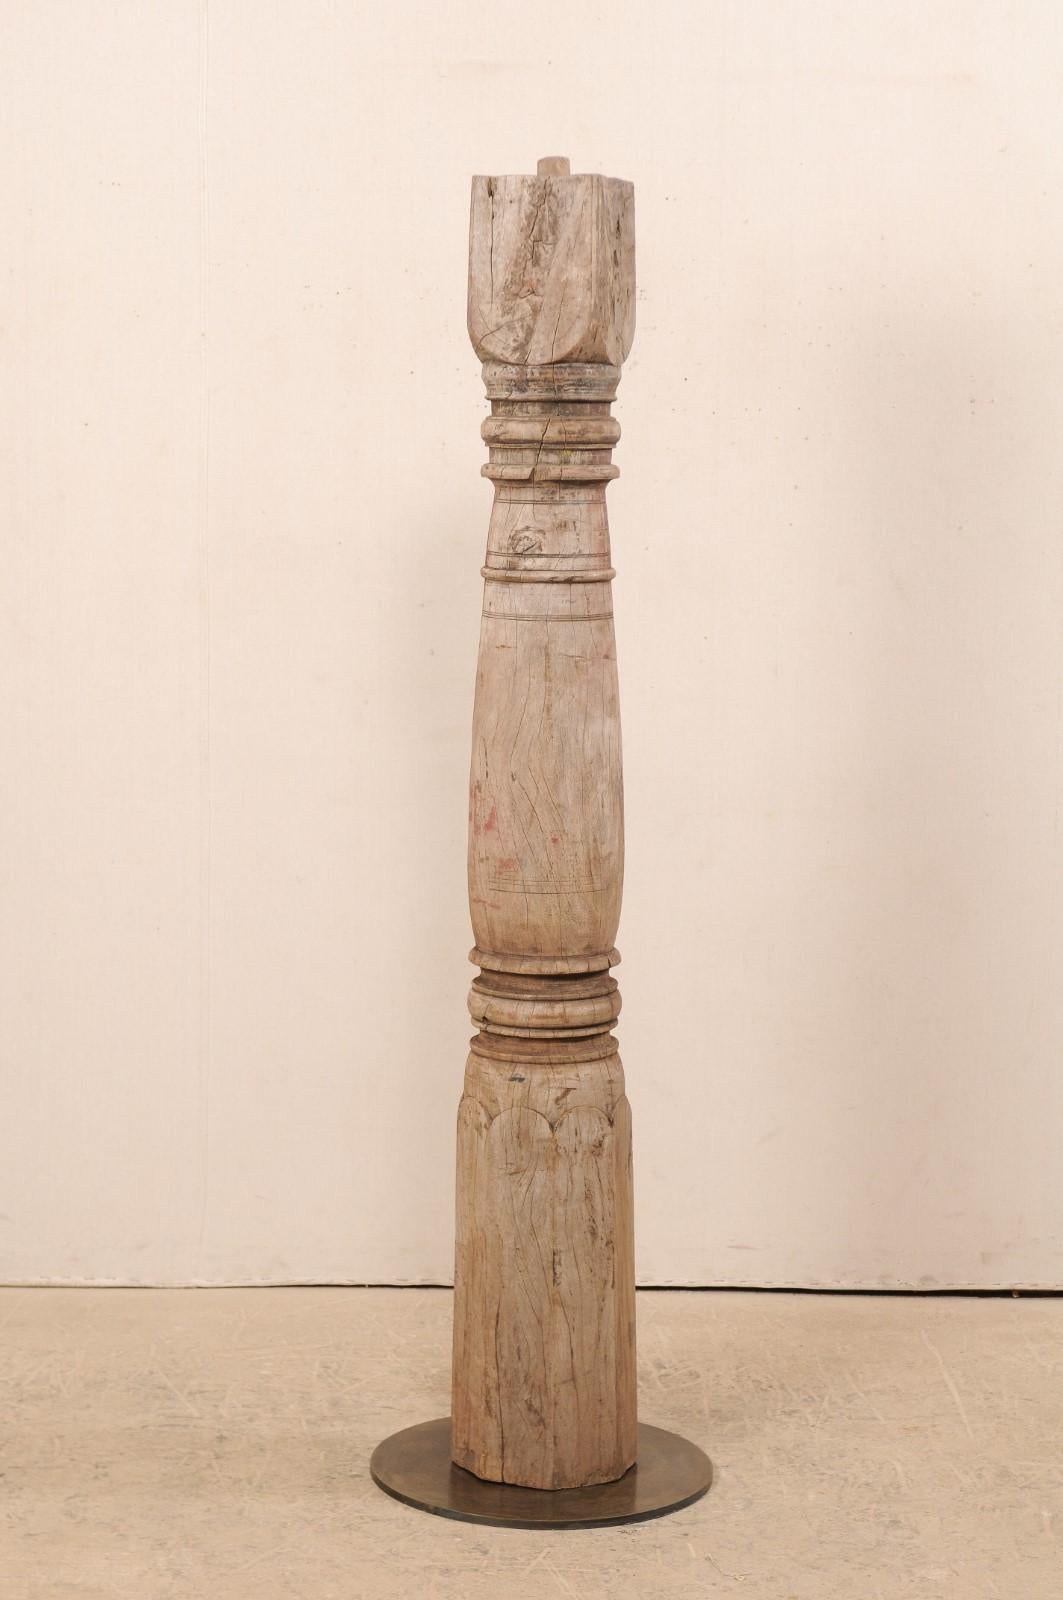 A single 19th century British Colonial carved wood column with custom stand. This antique hand carved wooden architectural element from India, which stands just over 6 feet in height, features a shapely body adorn with a series of carved rings an